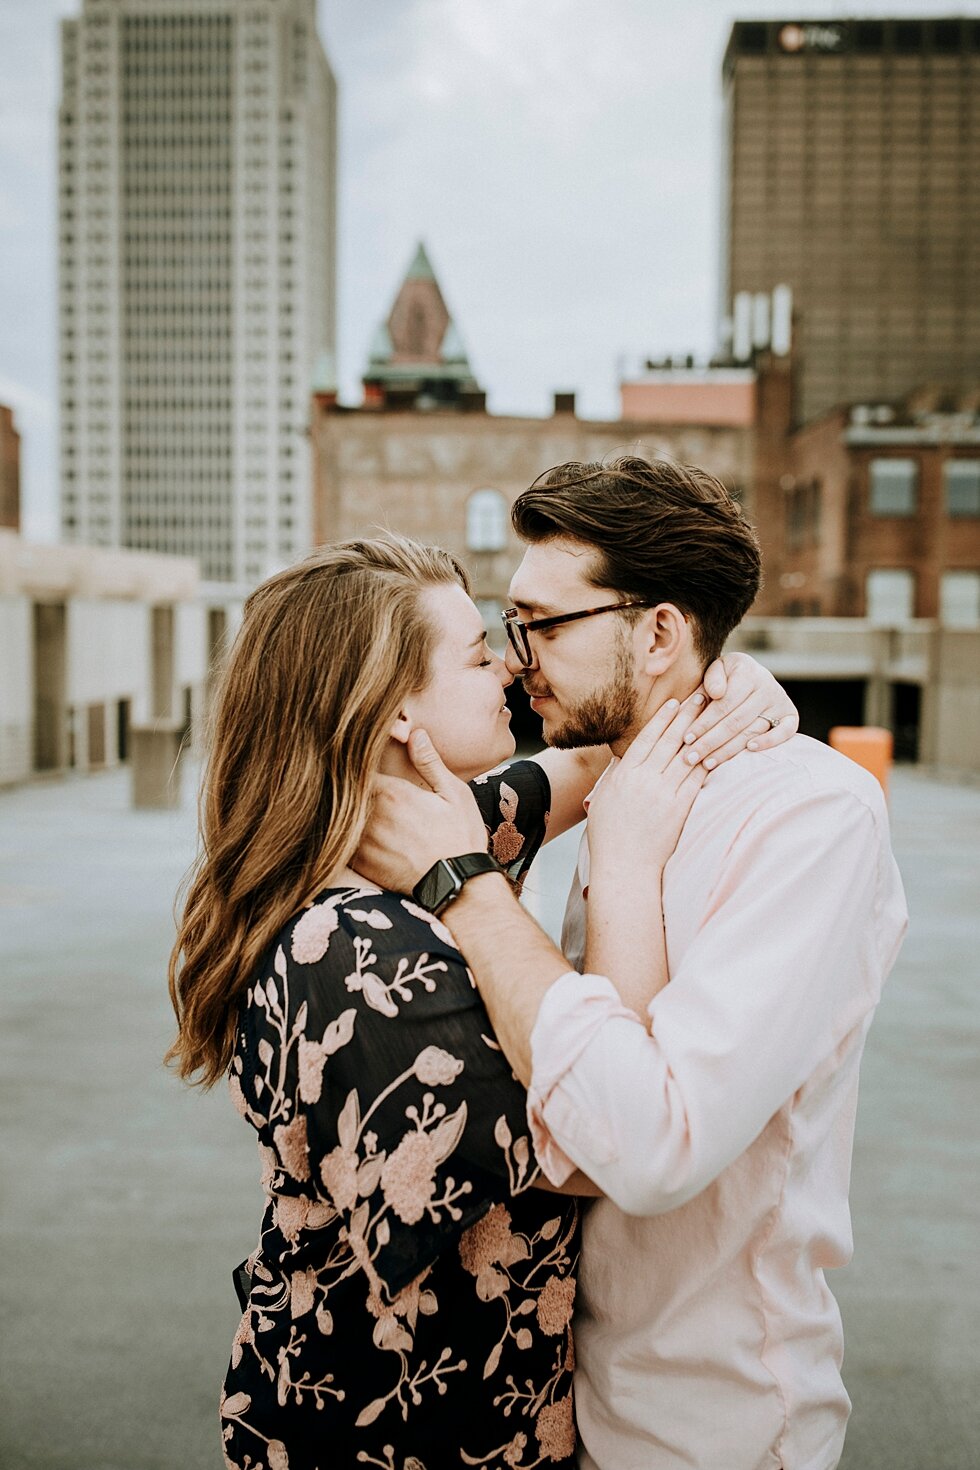  Rooftop engagement session capturing the tops of the buildings behind the engaged couple in Louisville, Kentucky. getting married outdoor session engaged couple together wedding preparation love excited stunning relationship #engagementphotos #midwe